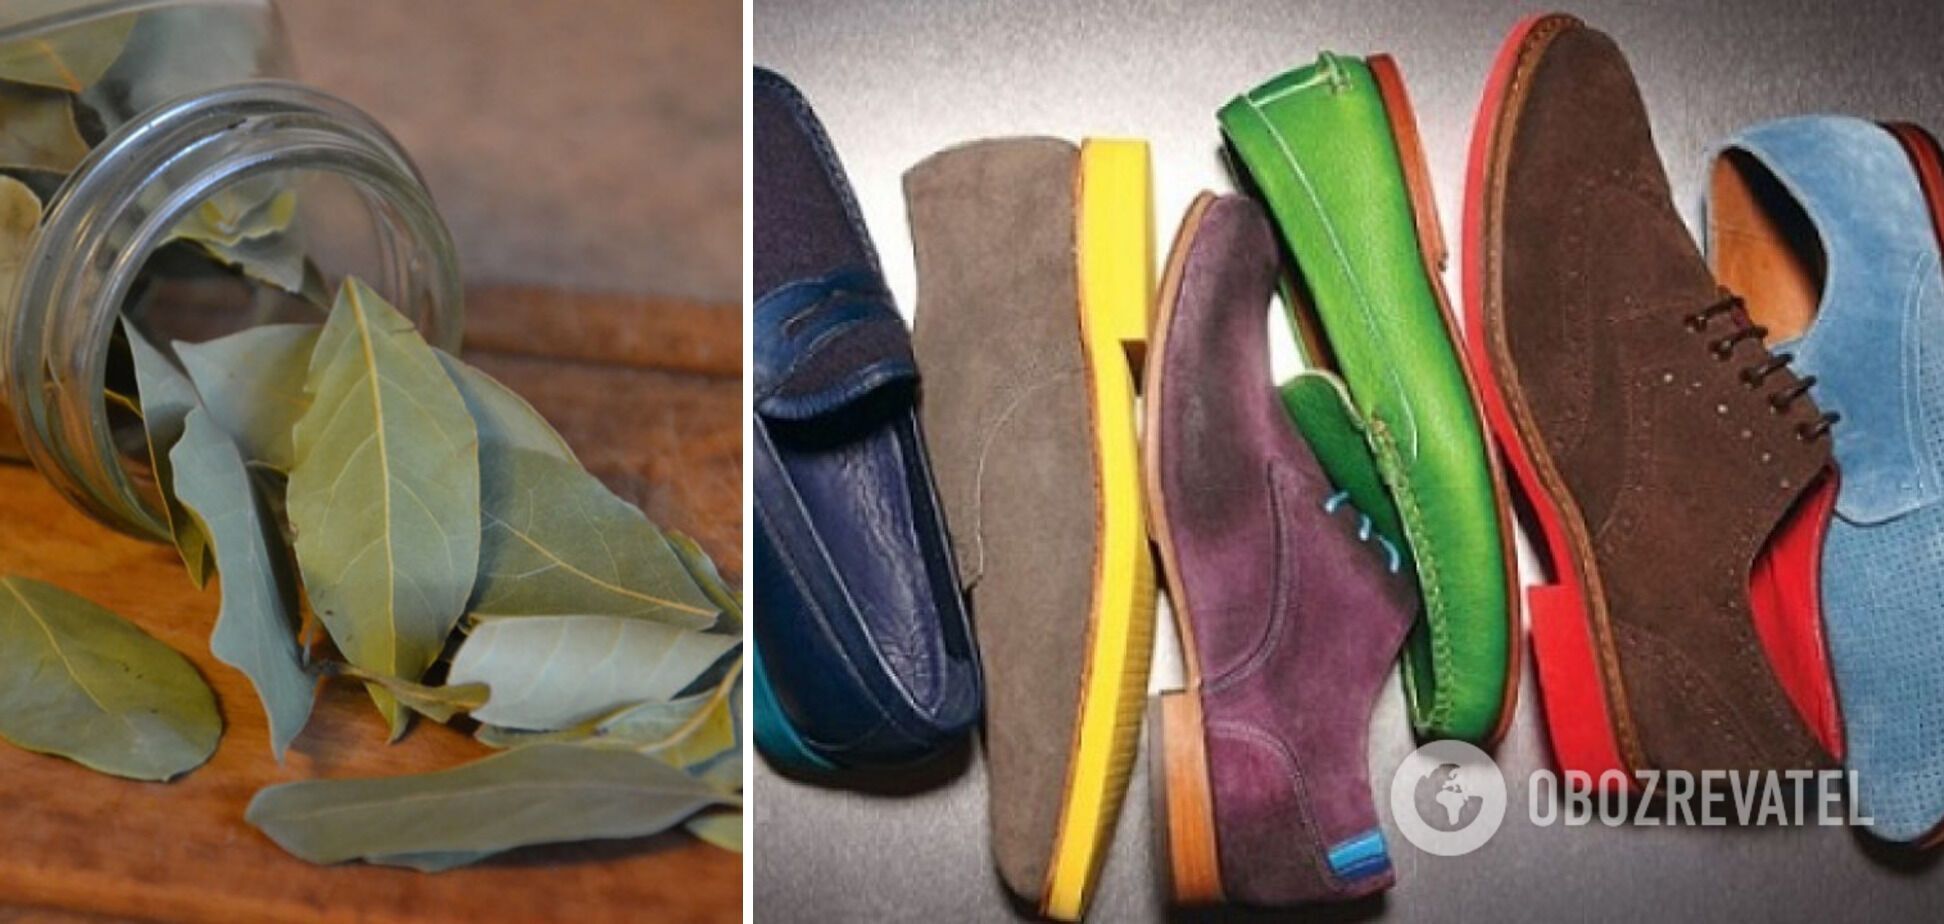 Why put bay leaves in shoes: what's the secret of the lifehack